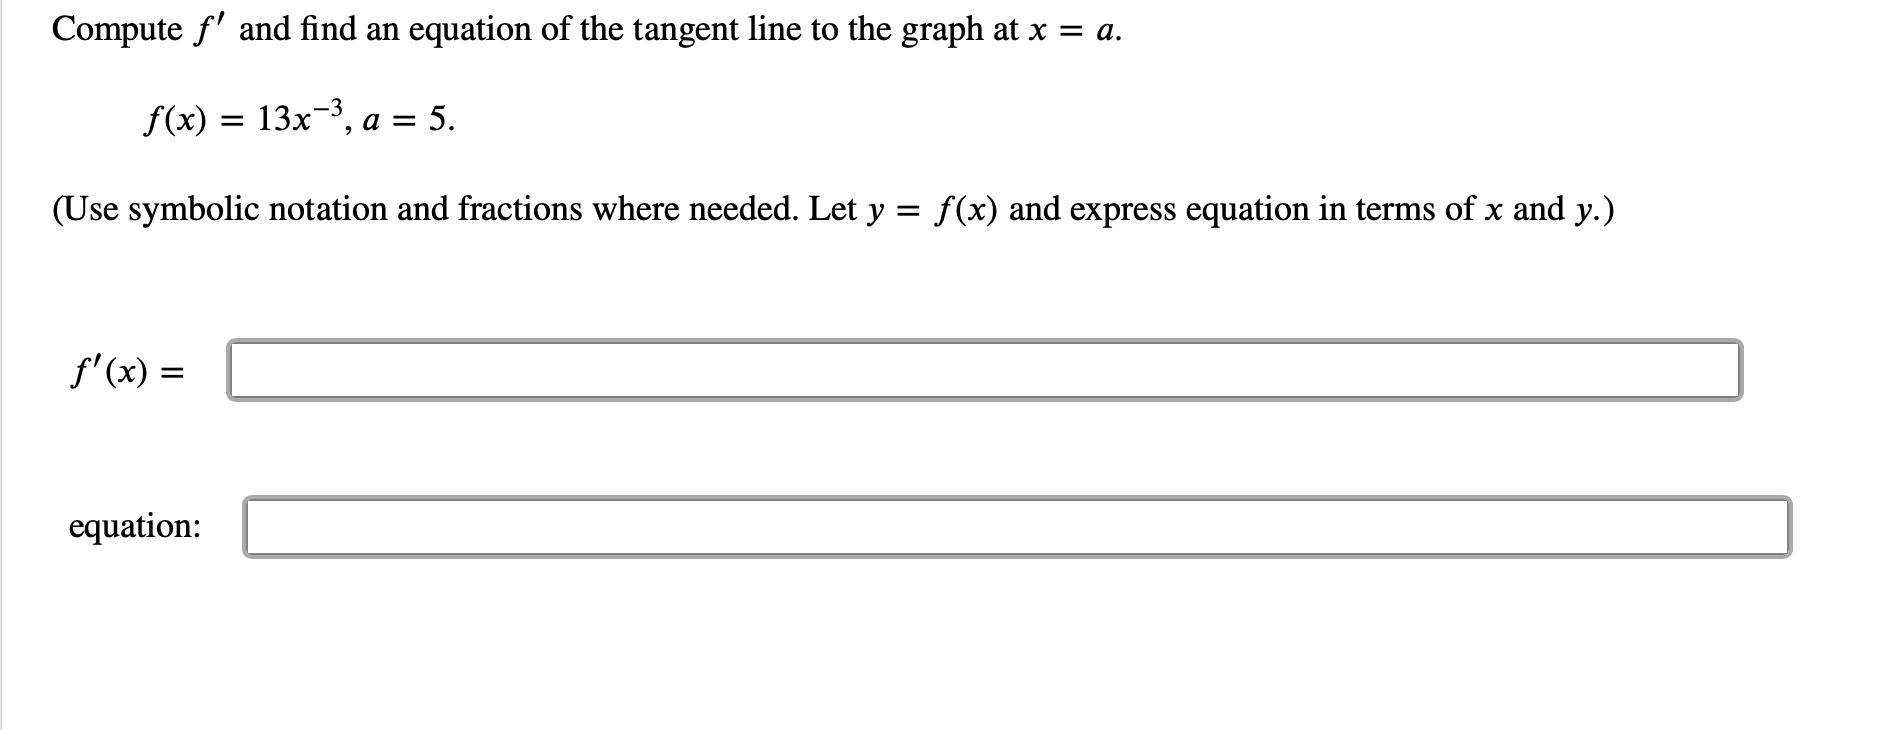 Compute f and find an
equation of the tangent line to the graph at x = a.
f(x) 13x3, a 5
(Use symbolic notation and fractions where needed. Let y = f(x) and express equation in terms of x and y.)
f'(x)
equation:
